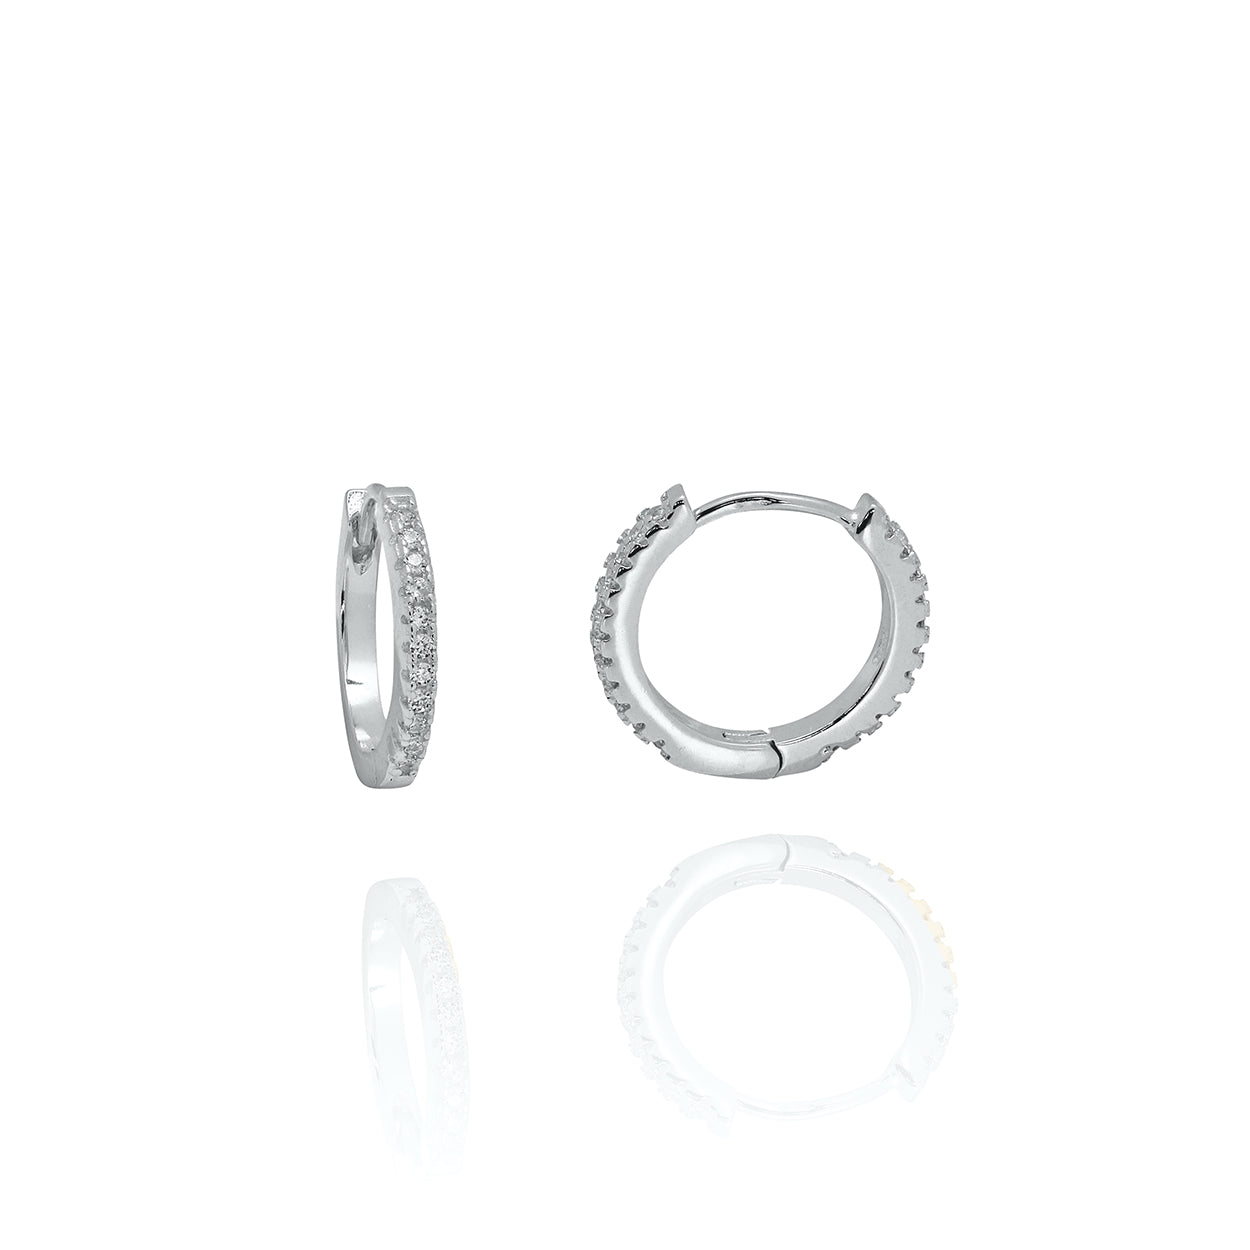 Sterling Silver Rhodium Plated Huggie Style Earrings with Prong Set Cubic Zirconia